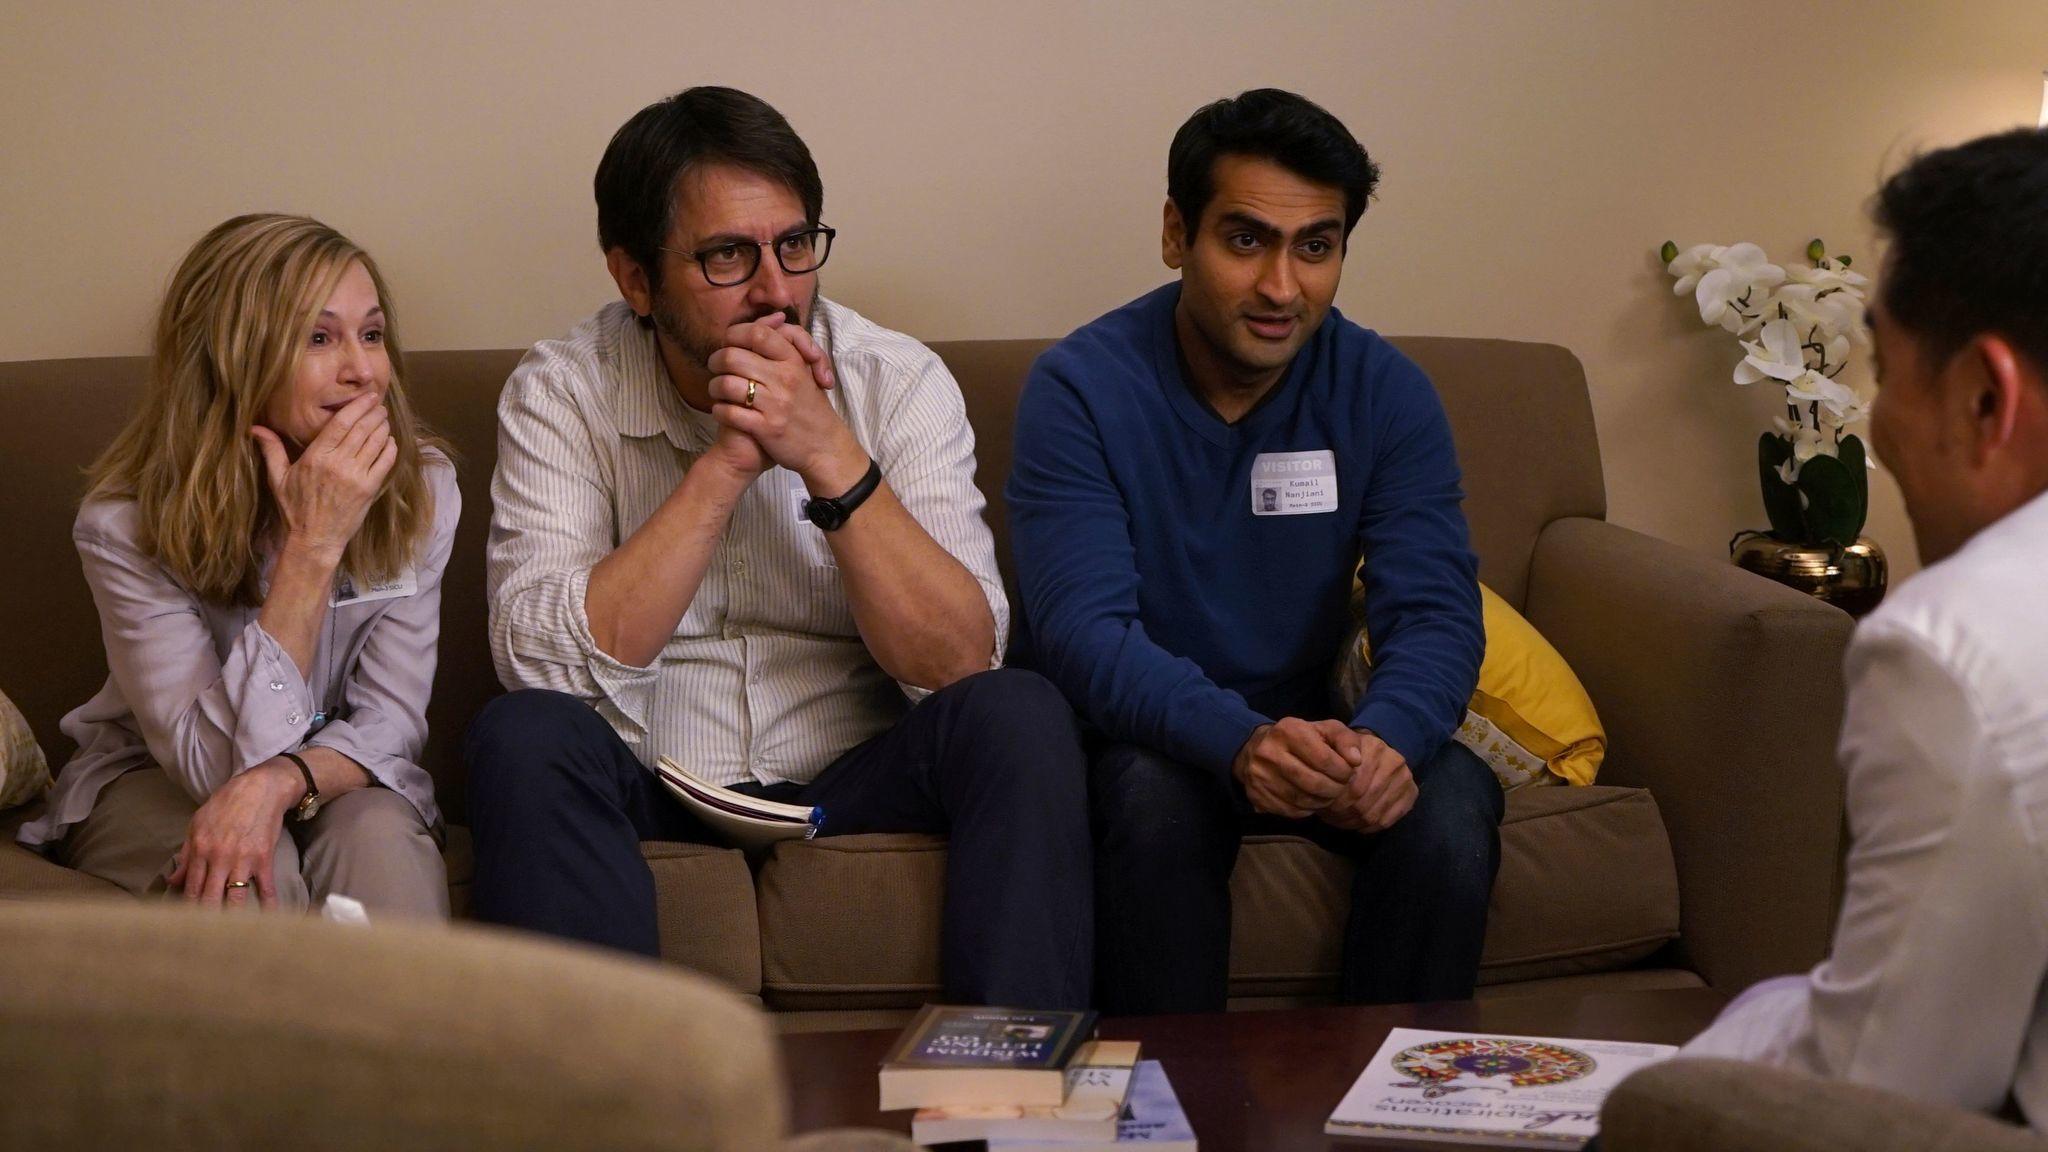 reasons Kumail Nanjiani and Emily V. Gordon stayed married after